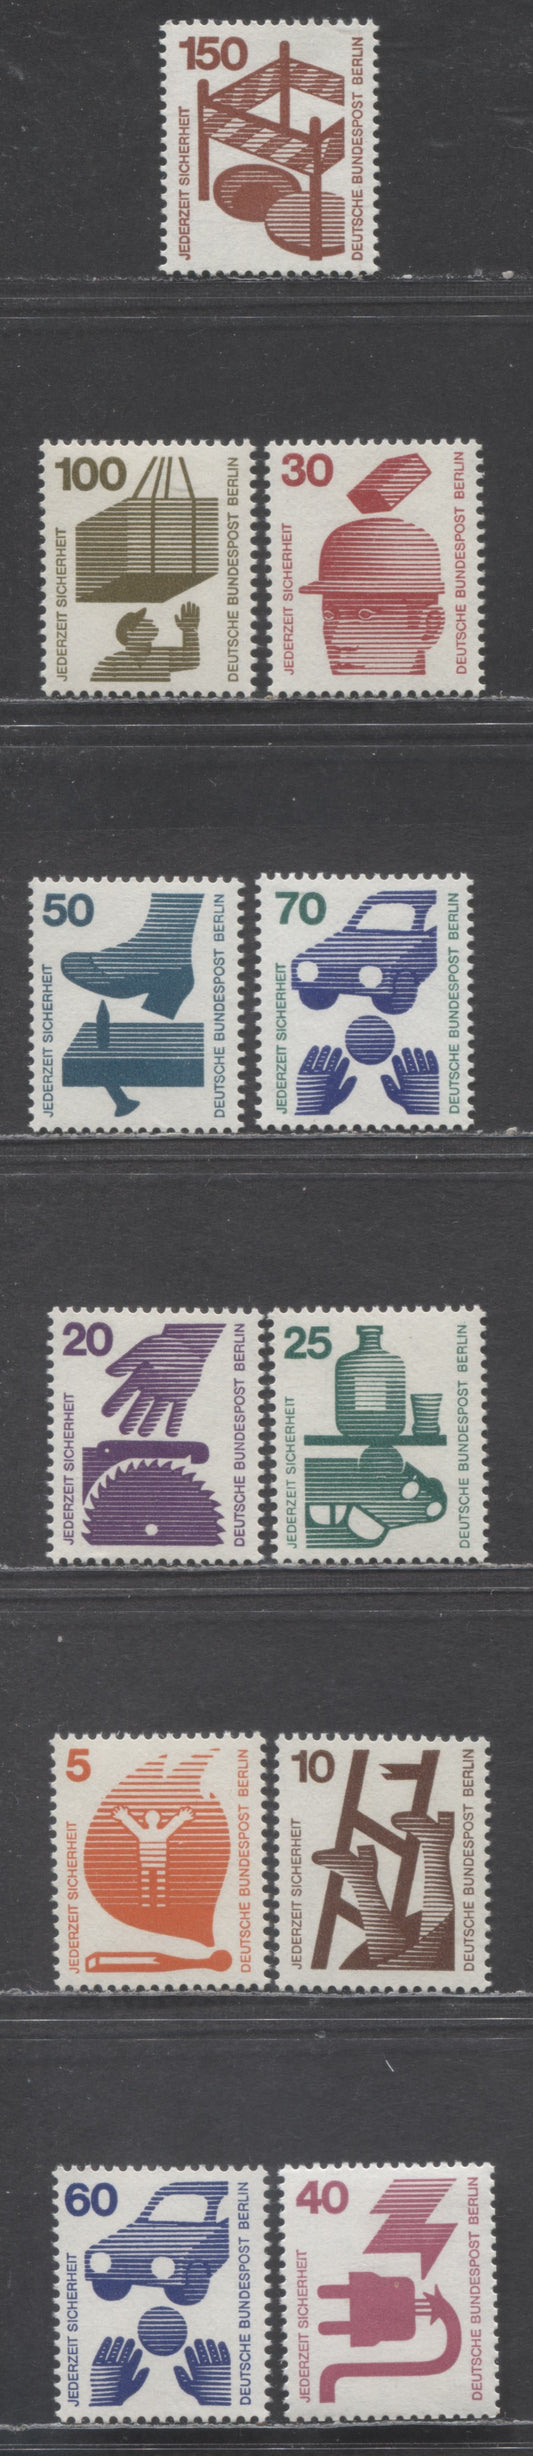 Berlin-Germany SC#9N316-9N325(Mi#402A-411A, 453) 1971-1973 Accident Prevention Defintives Issue, 11 VFNH Singles, Click on Listing to See ALL Pictures, Estimated Value $15 USD